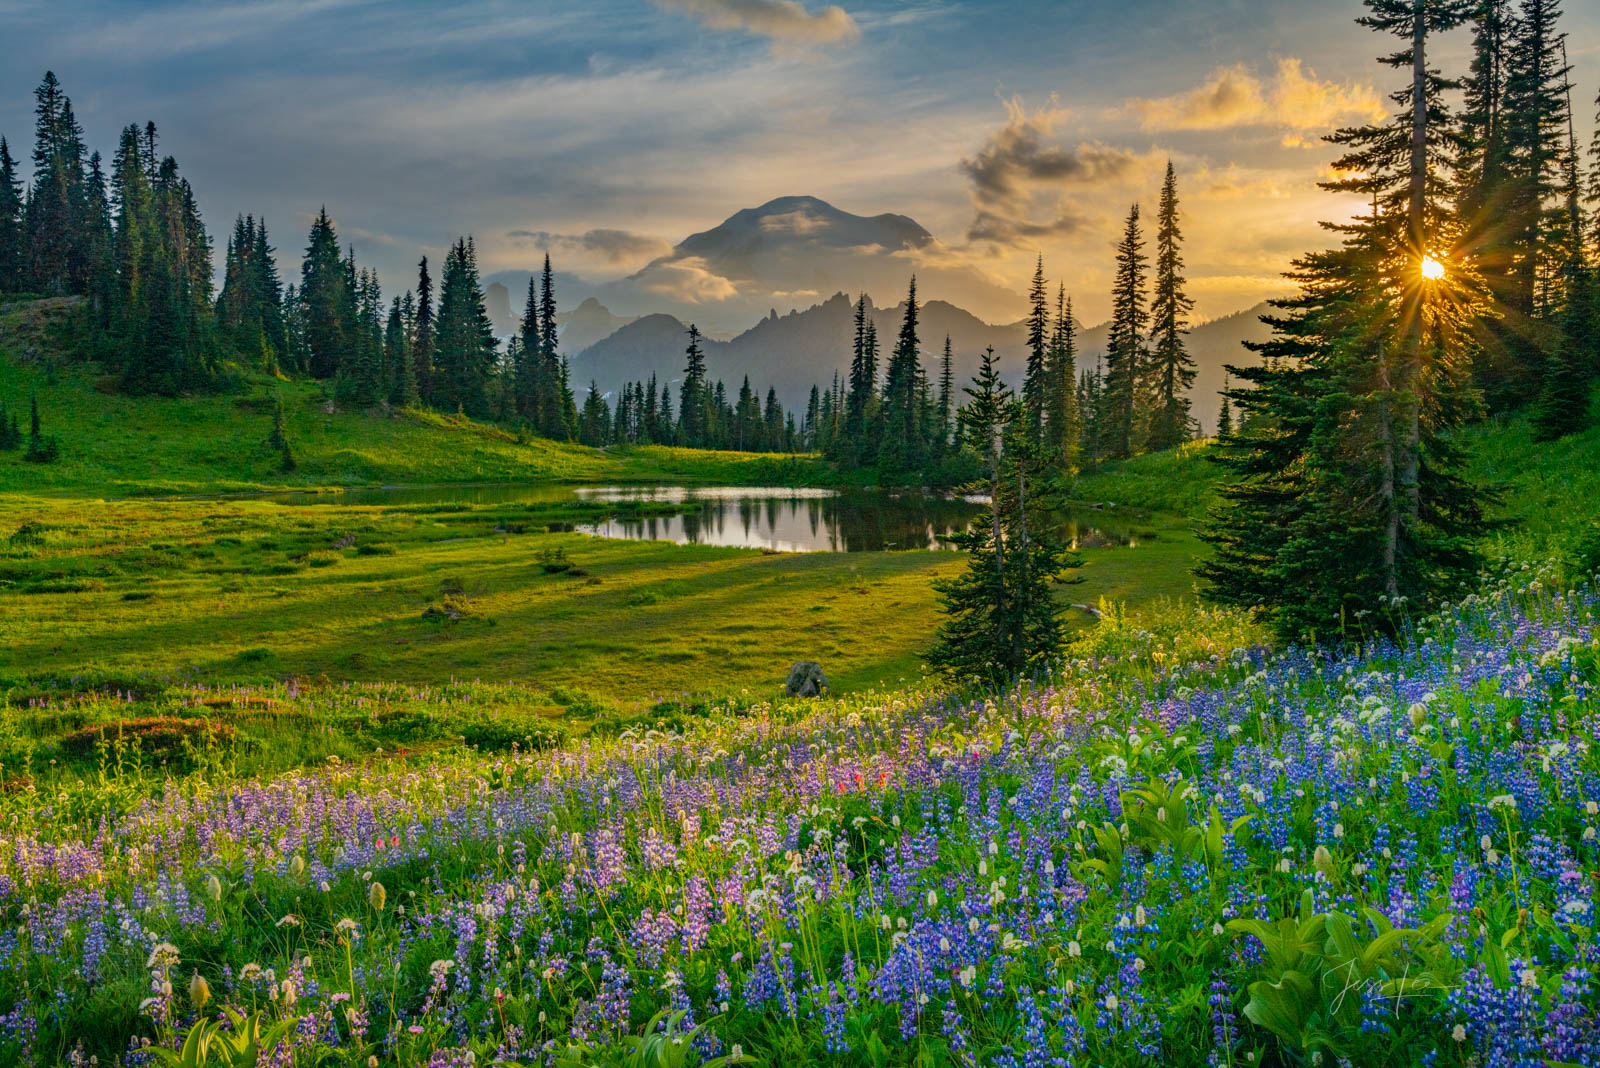 Mount Rainer Photograph Fine Art Print of summer flowers blue color and snow capped mountain photo at sunset.